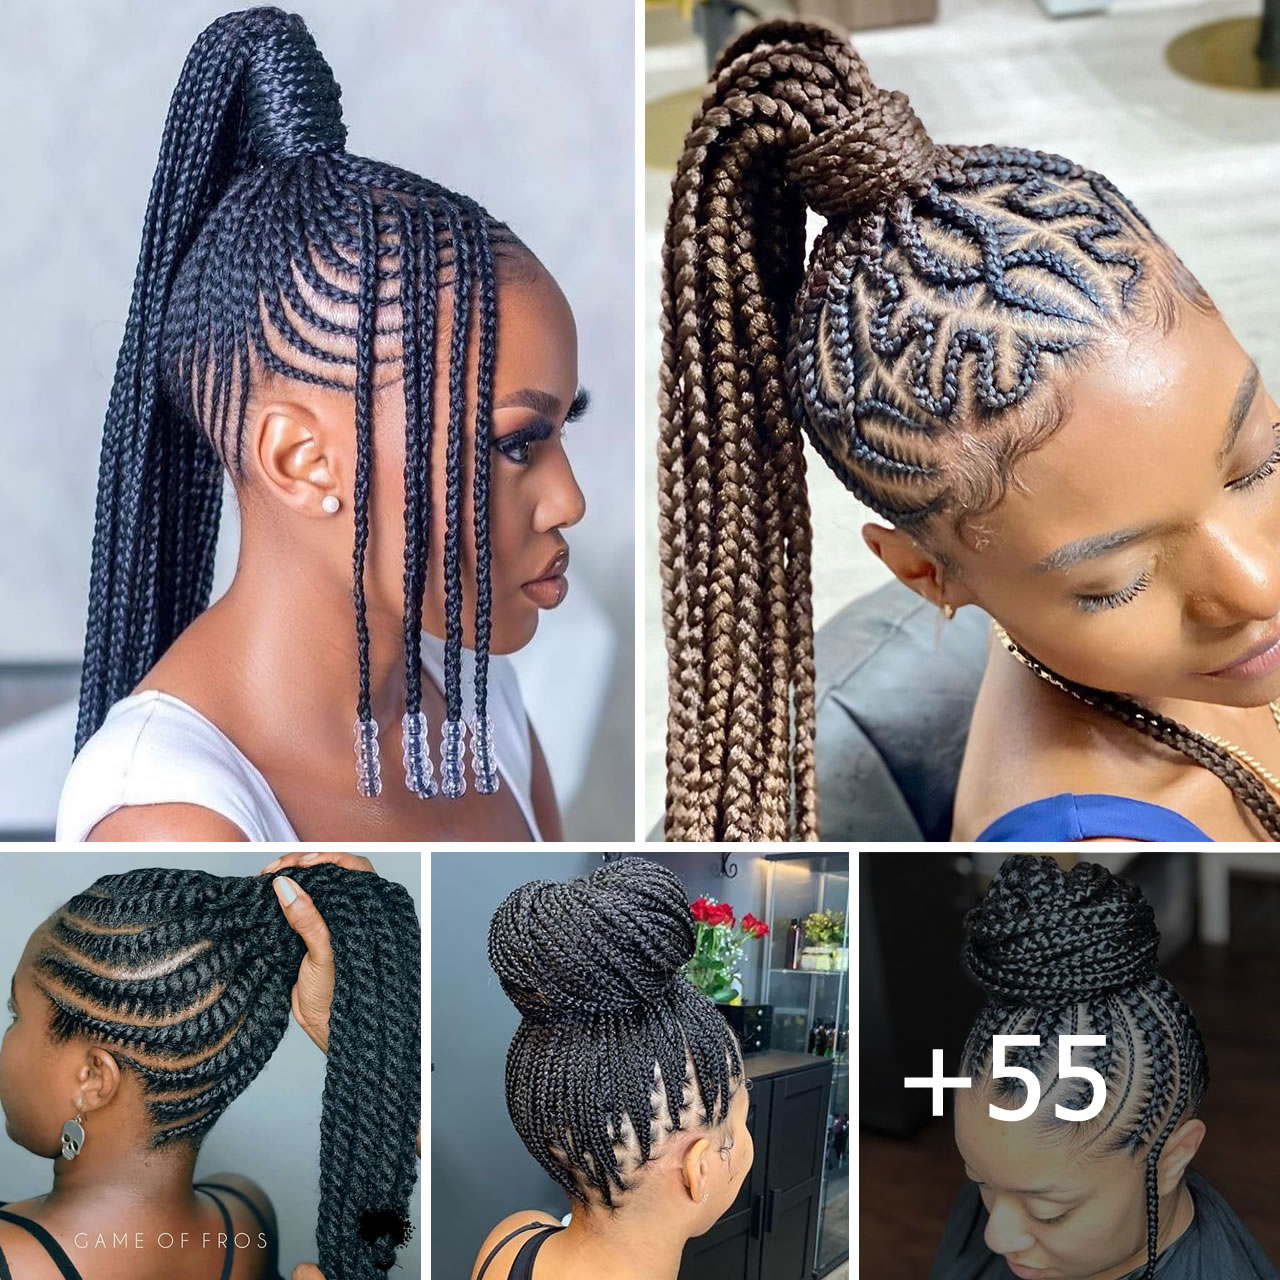 55 Gorgeous Braided Updo Hairstyles to Show Off Your Style